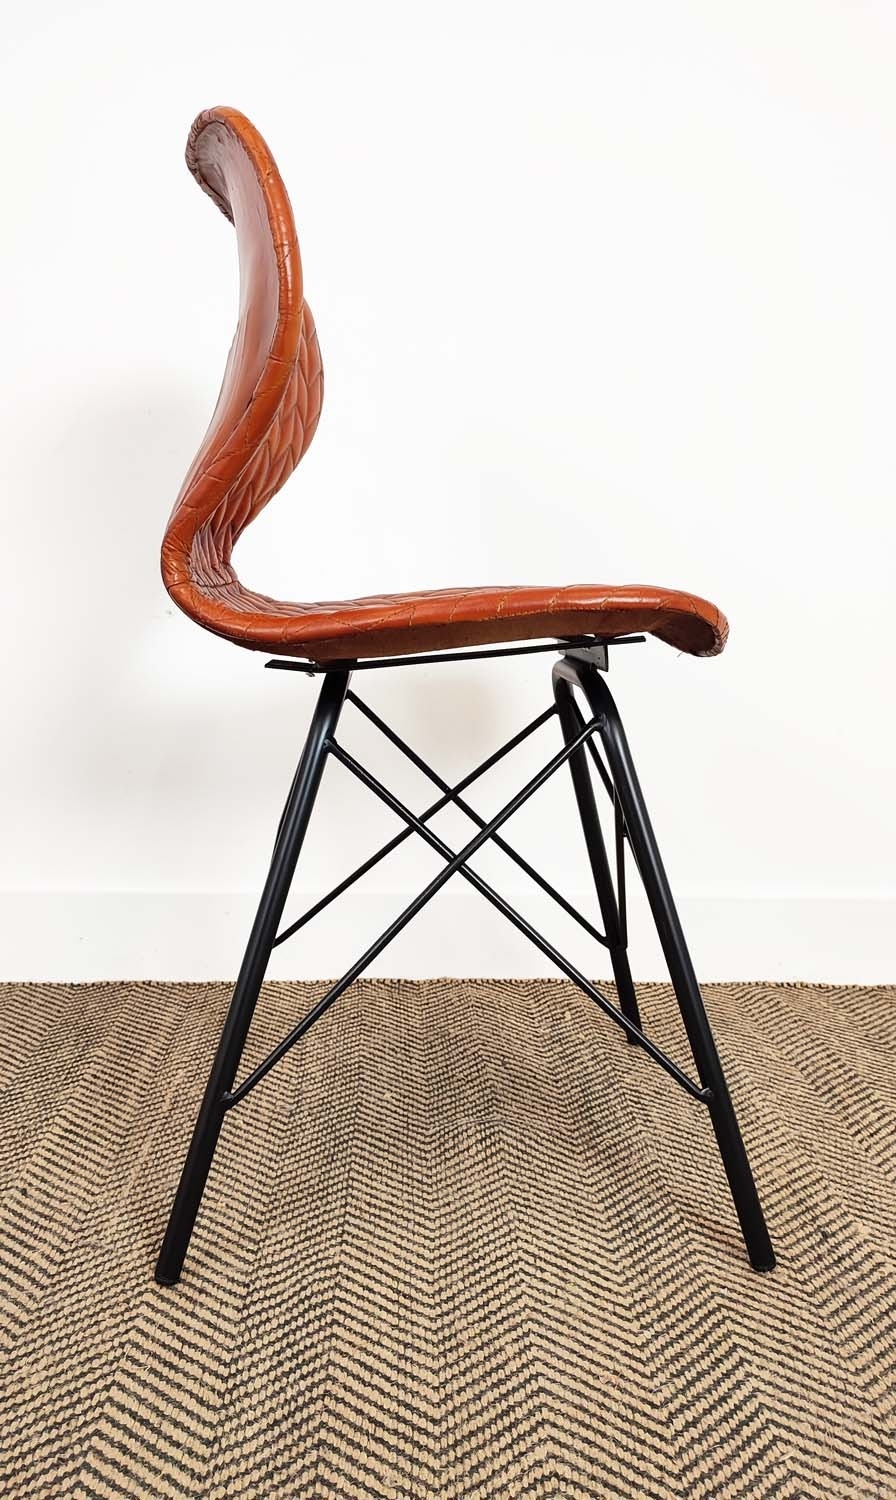 SIDE CHAIRS, a pair, stitched leather upholstery, 85cm H x 42cm W x 46cm D. (2) - Image 5 of 6